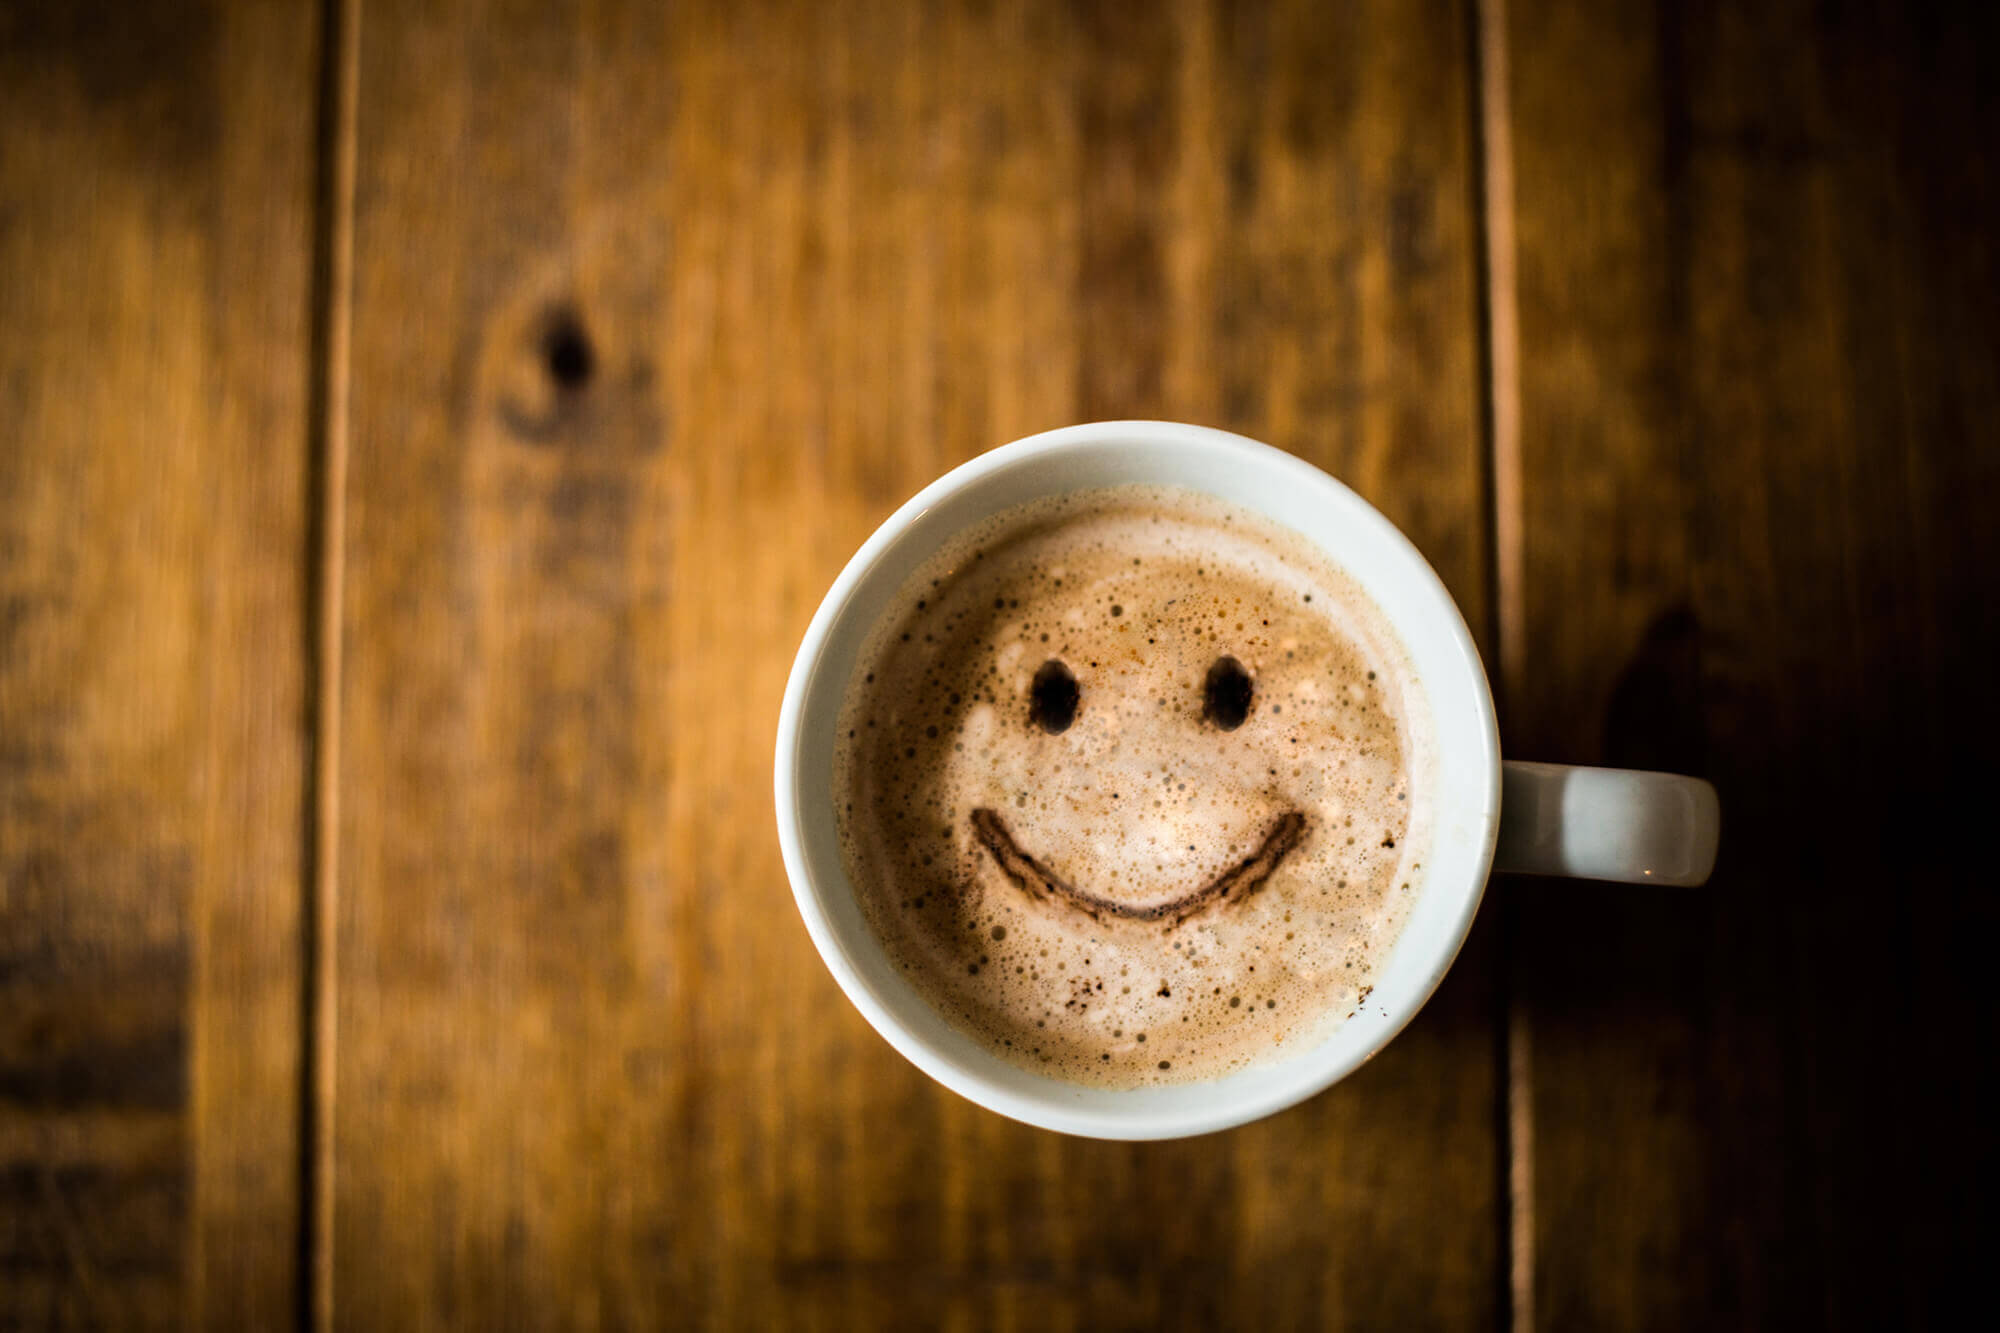 A cup of coffee with a smiley face drawn on it